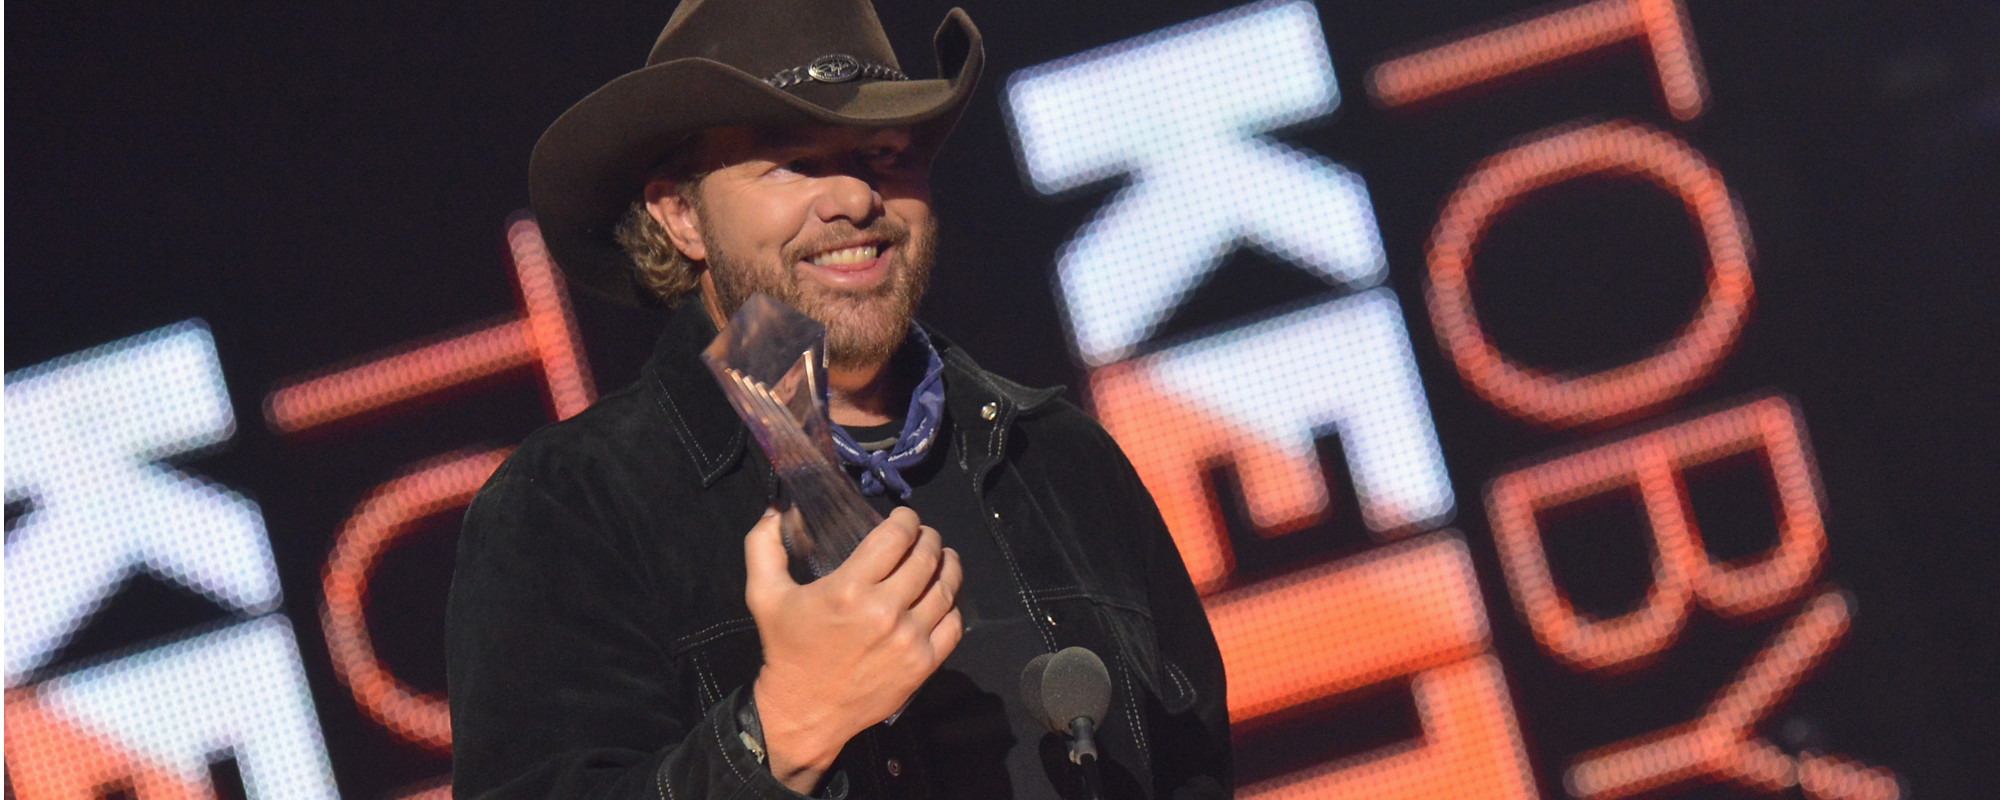 Relive Toby Keith’s Unapologetically Patriotic Performance of “Courtesy of the Red, White, and Blue” While Battling Cancer